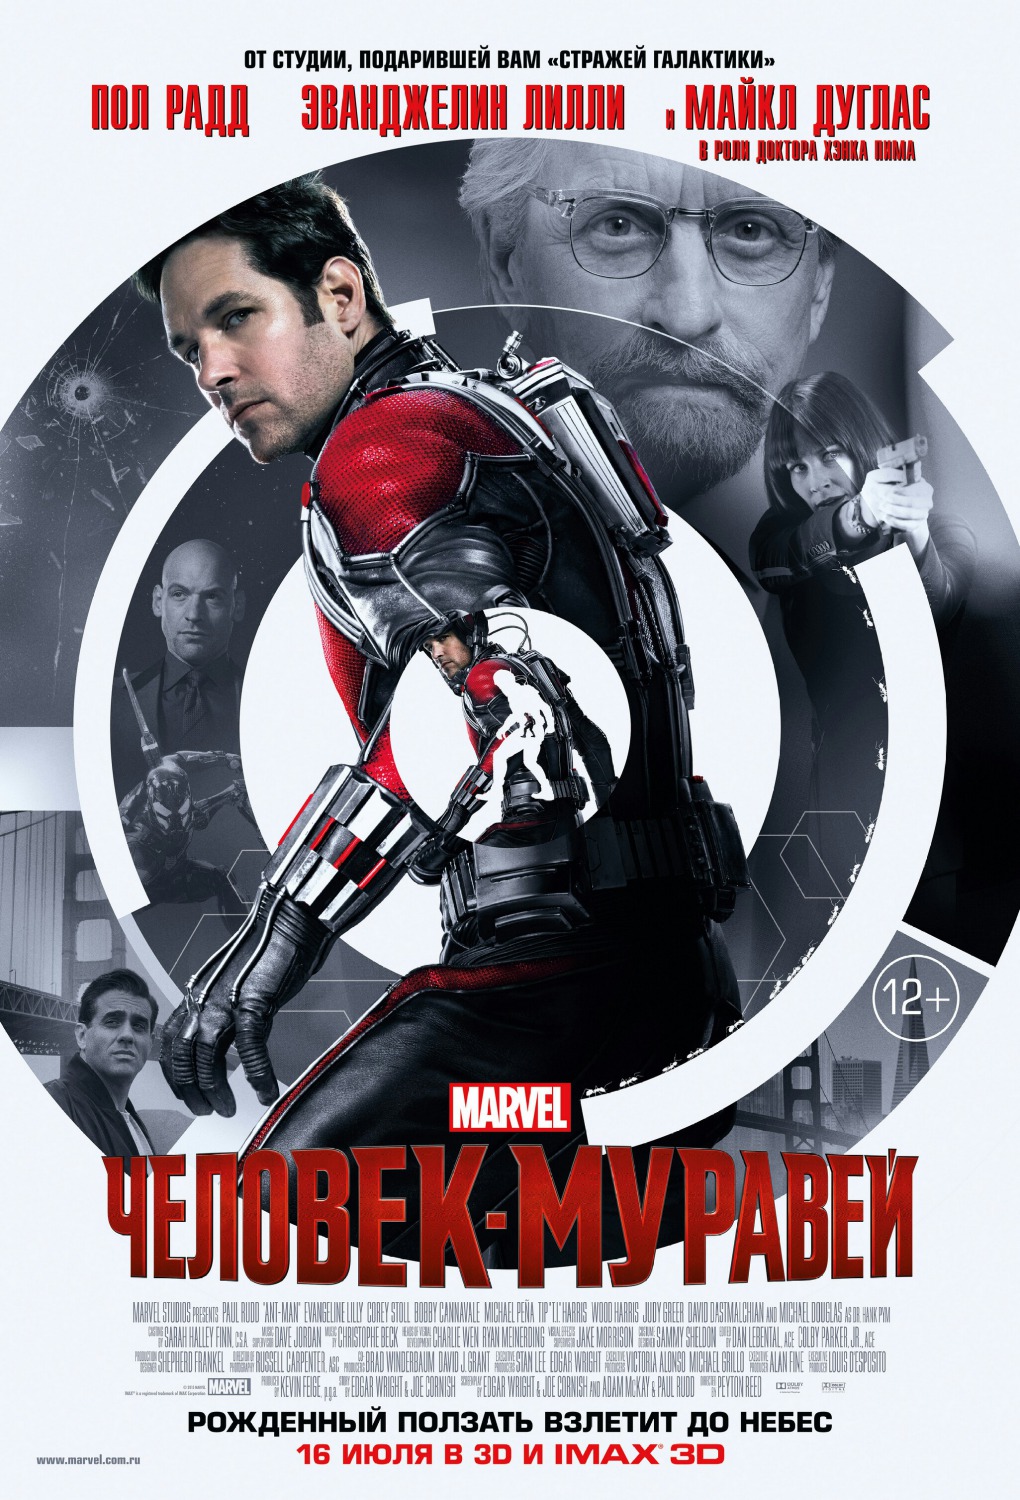 Extra Large Movie Poster Image for Ant-Man (#8 of 22)